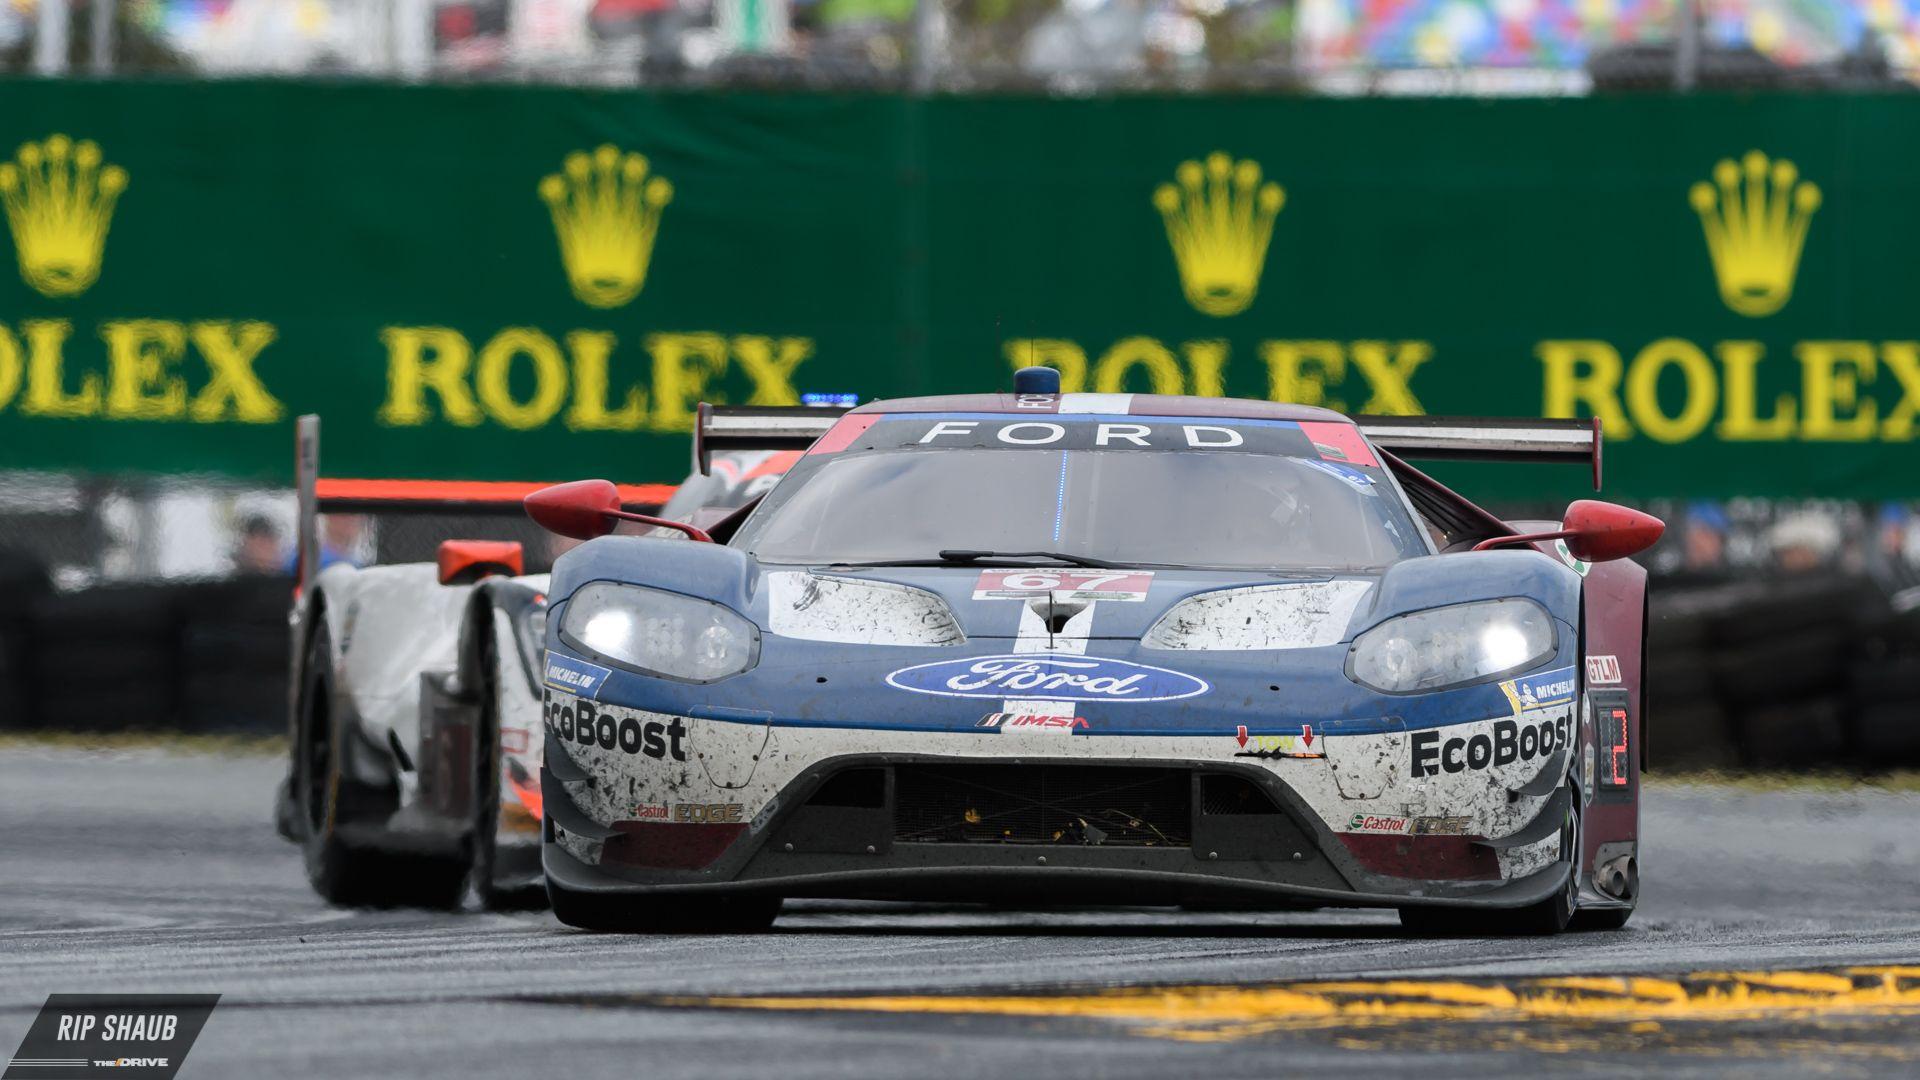 Seven IMSA Ran Cars To Compete At 24 Hours Of Le Mans In 2018